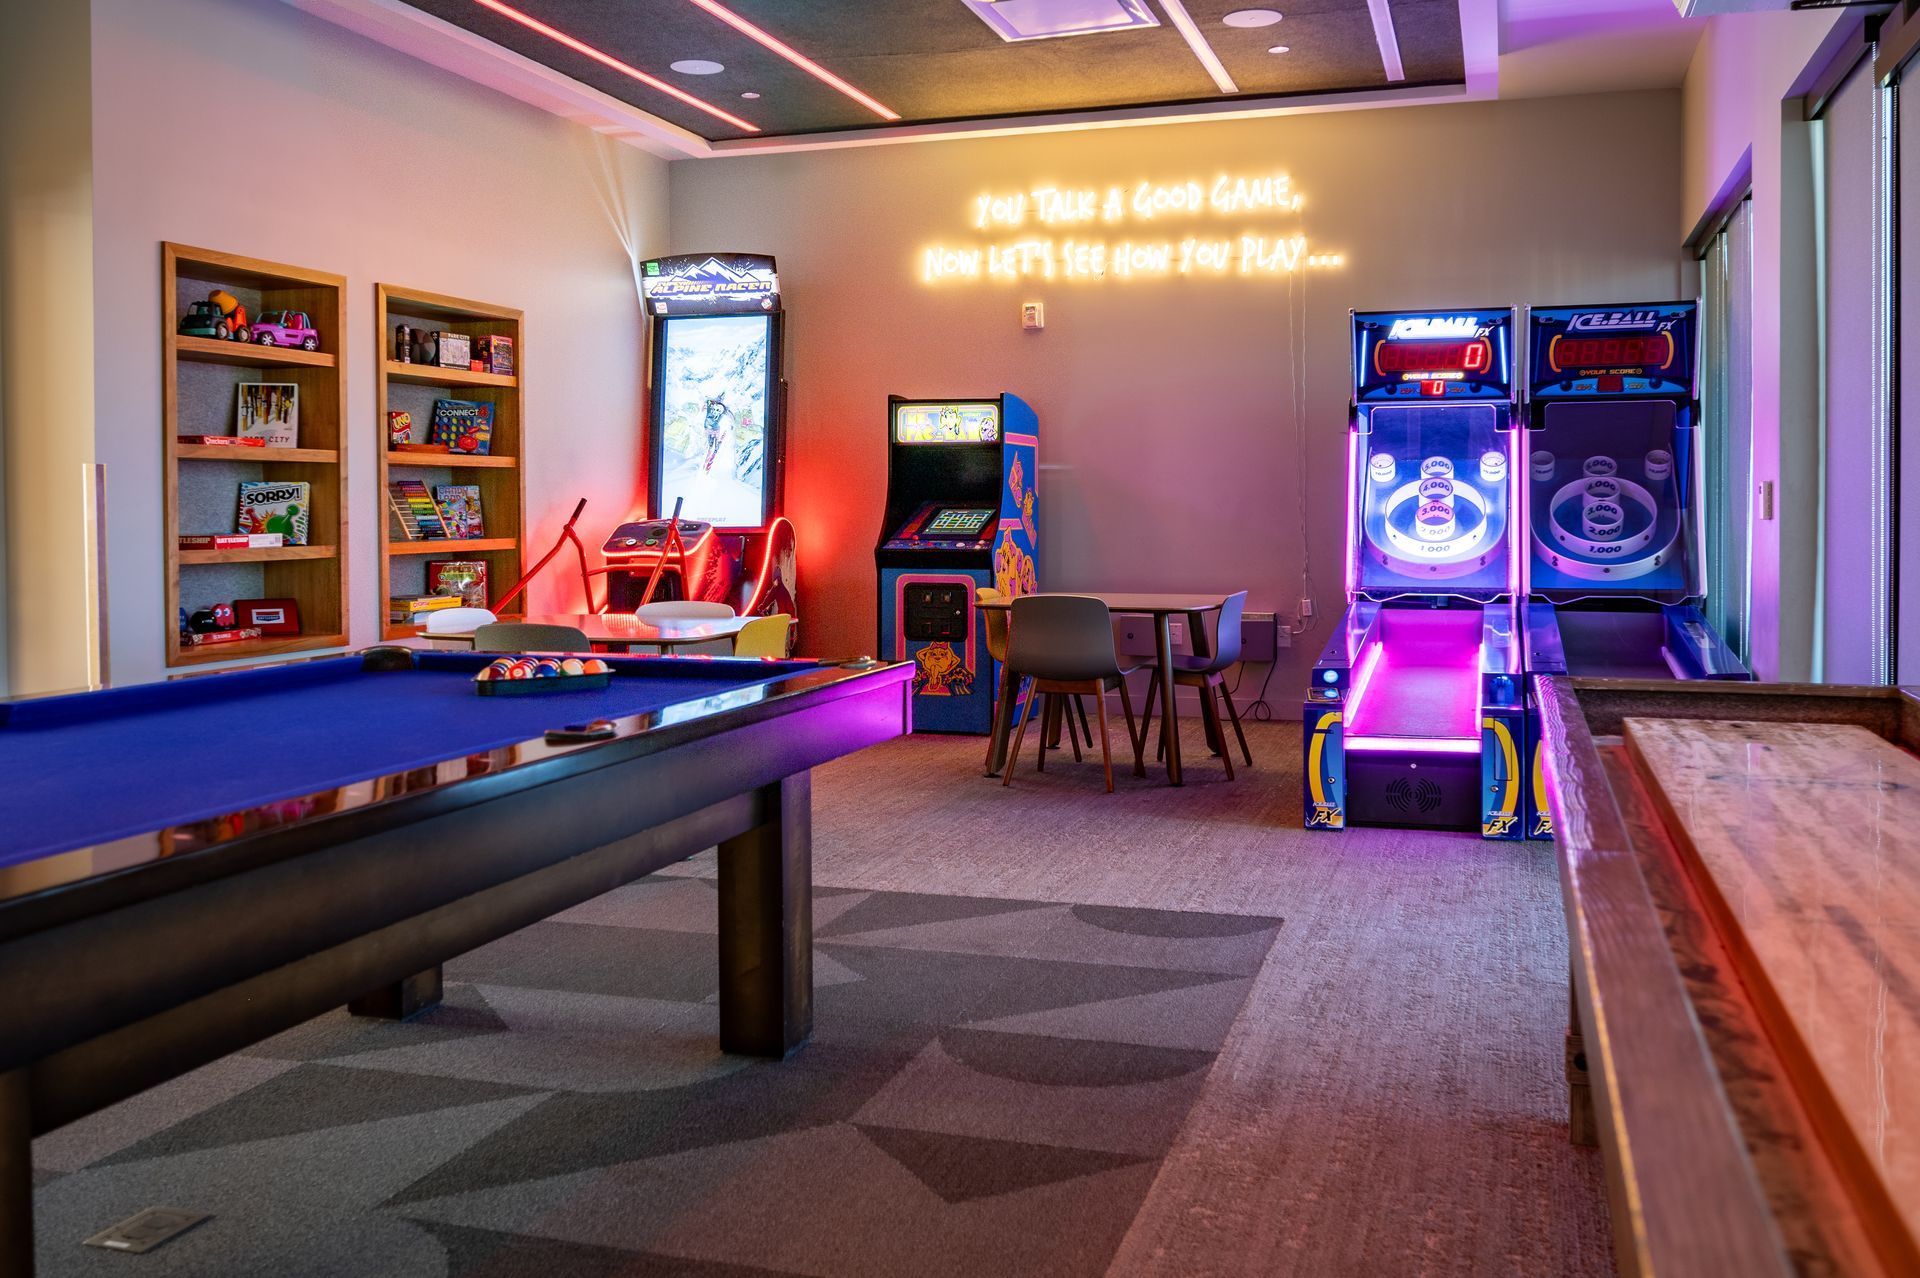 Canyon Village Resort game room with a pool table and arcade games.